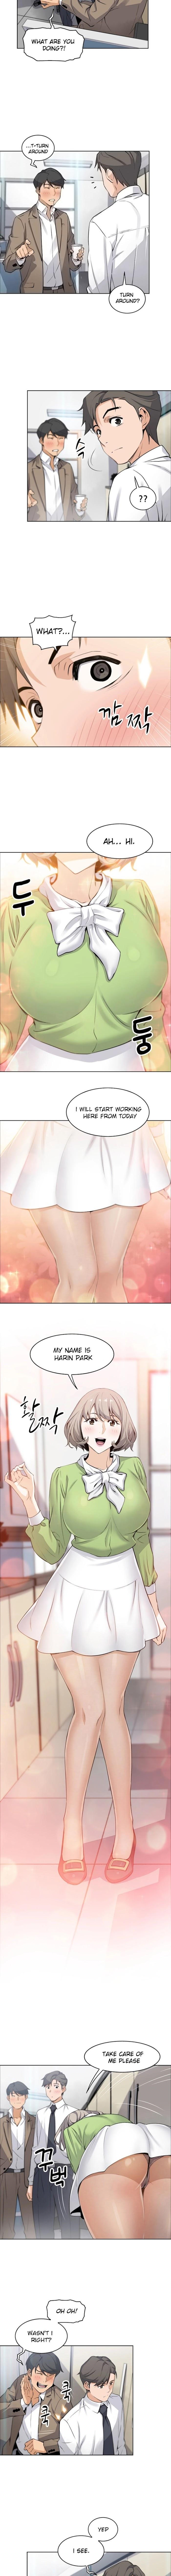 Housekeeper [Neck Pillow, Paper] Ch.49/49 [English] [Manhwa PDF] Completed 146